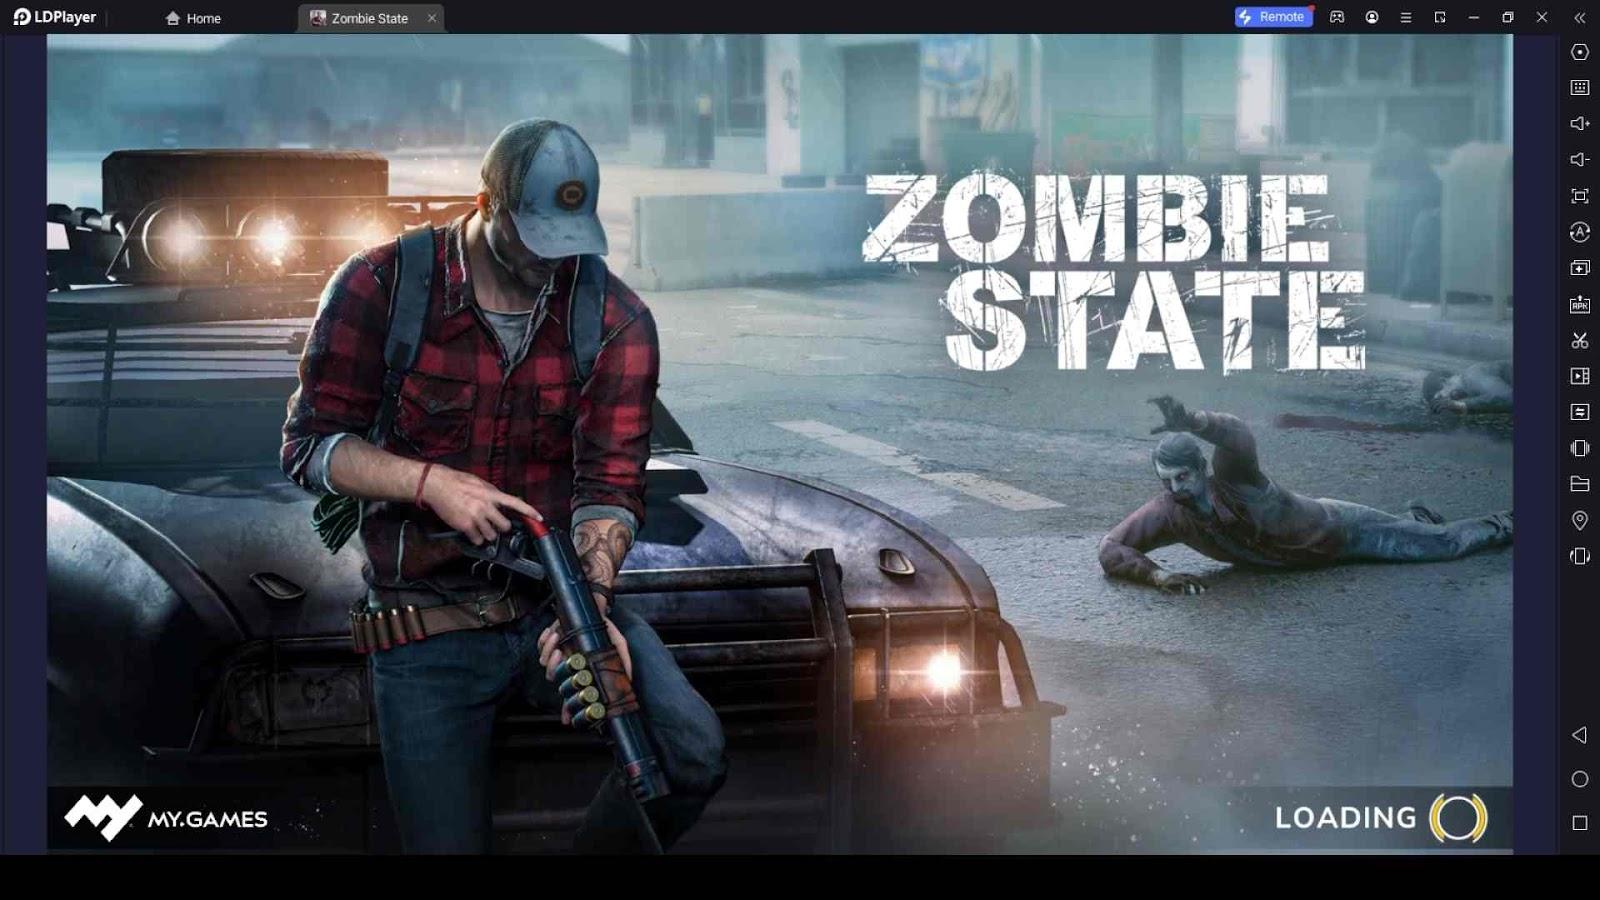 Beat the Zombies with Zombie State: Rogue-like FPS Tips